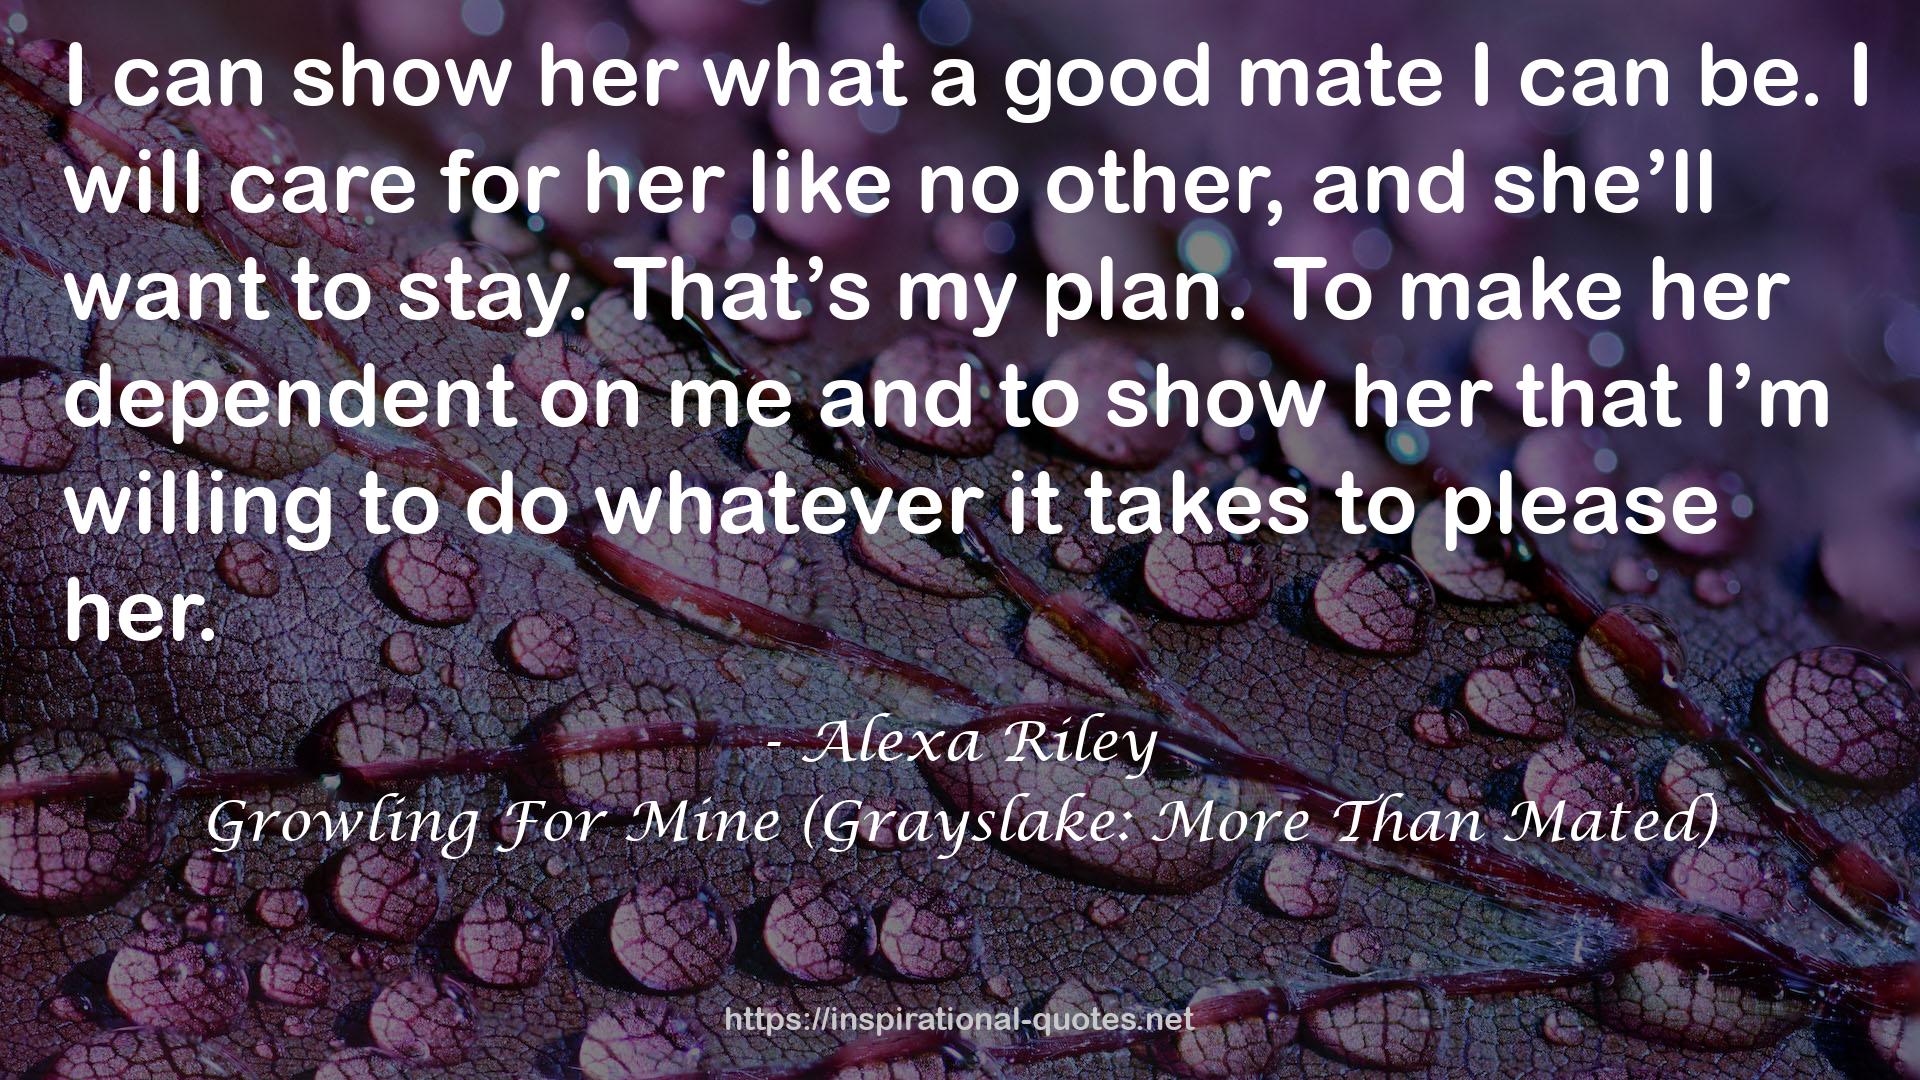 Growling For Mine (Grayslake: More Than Mated) QUOTES